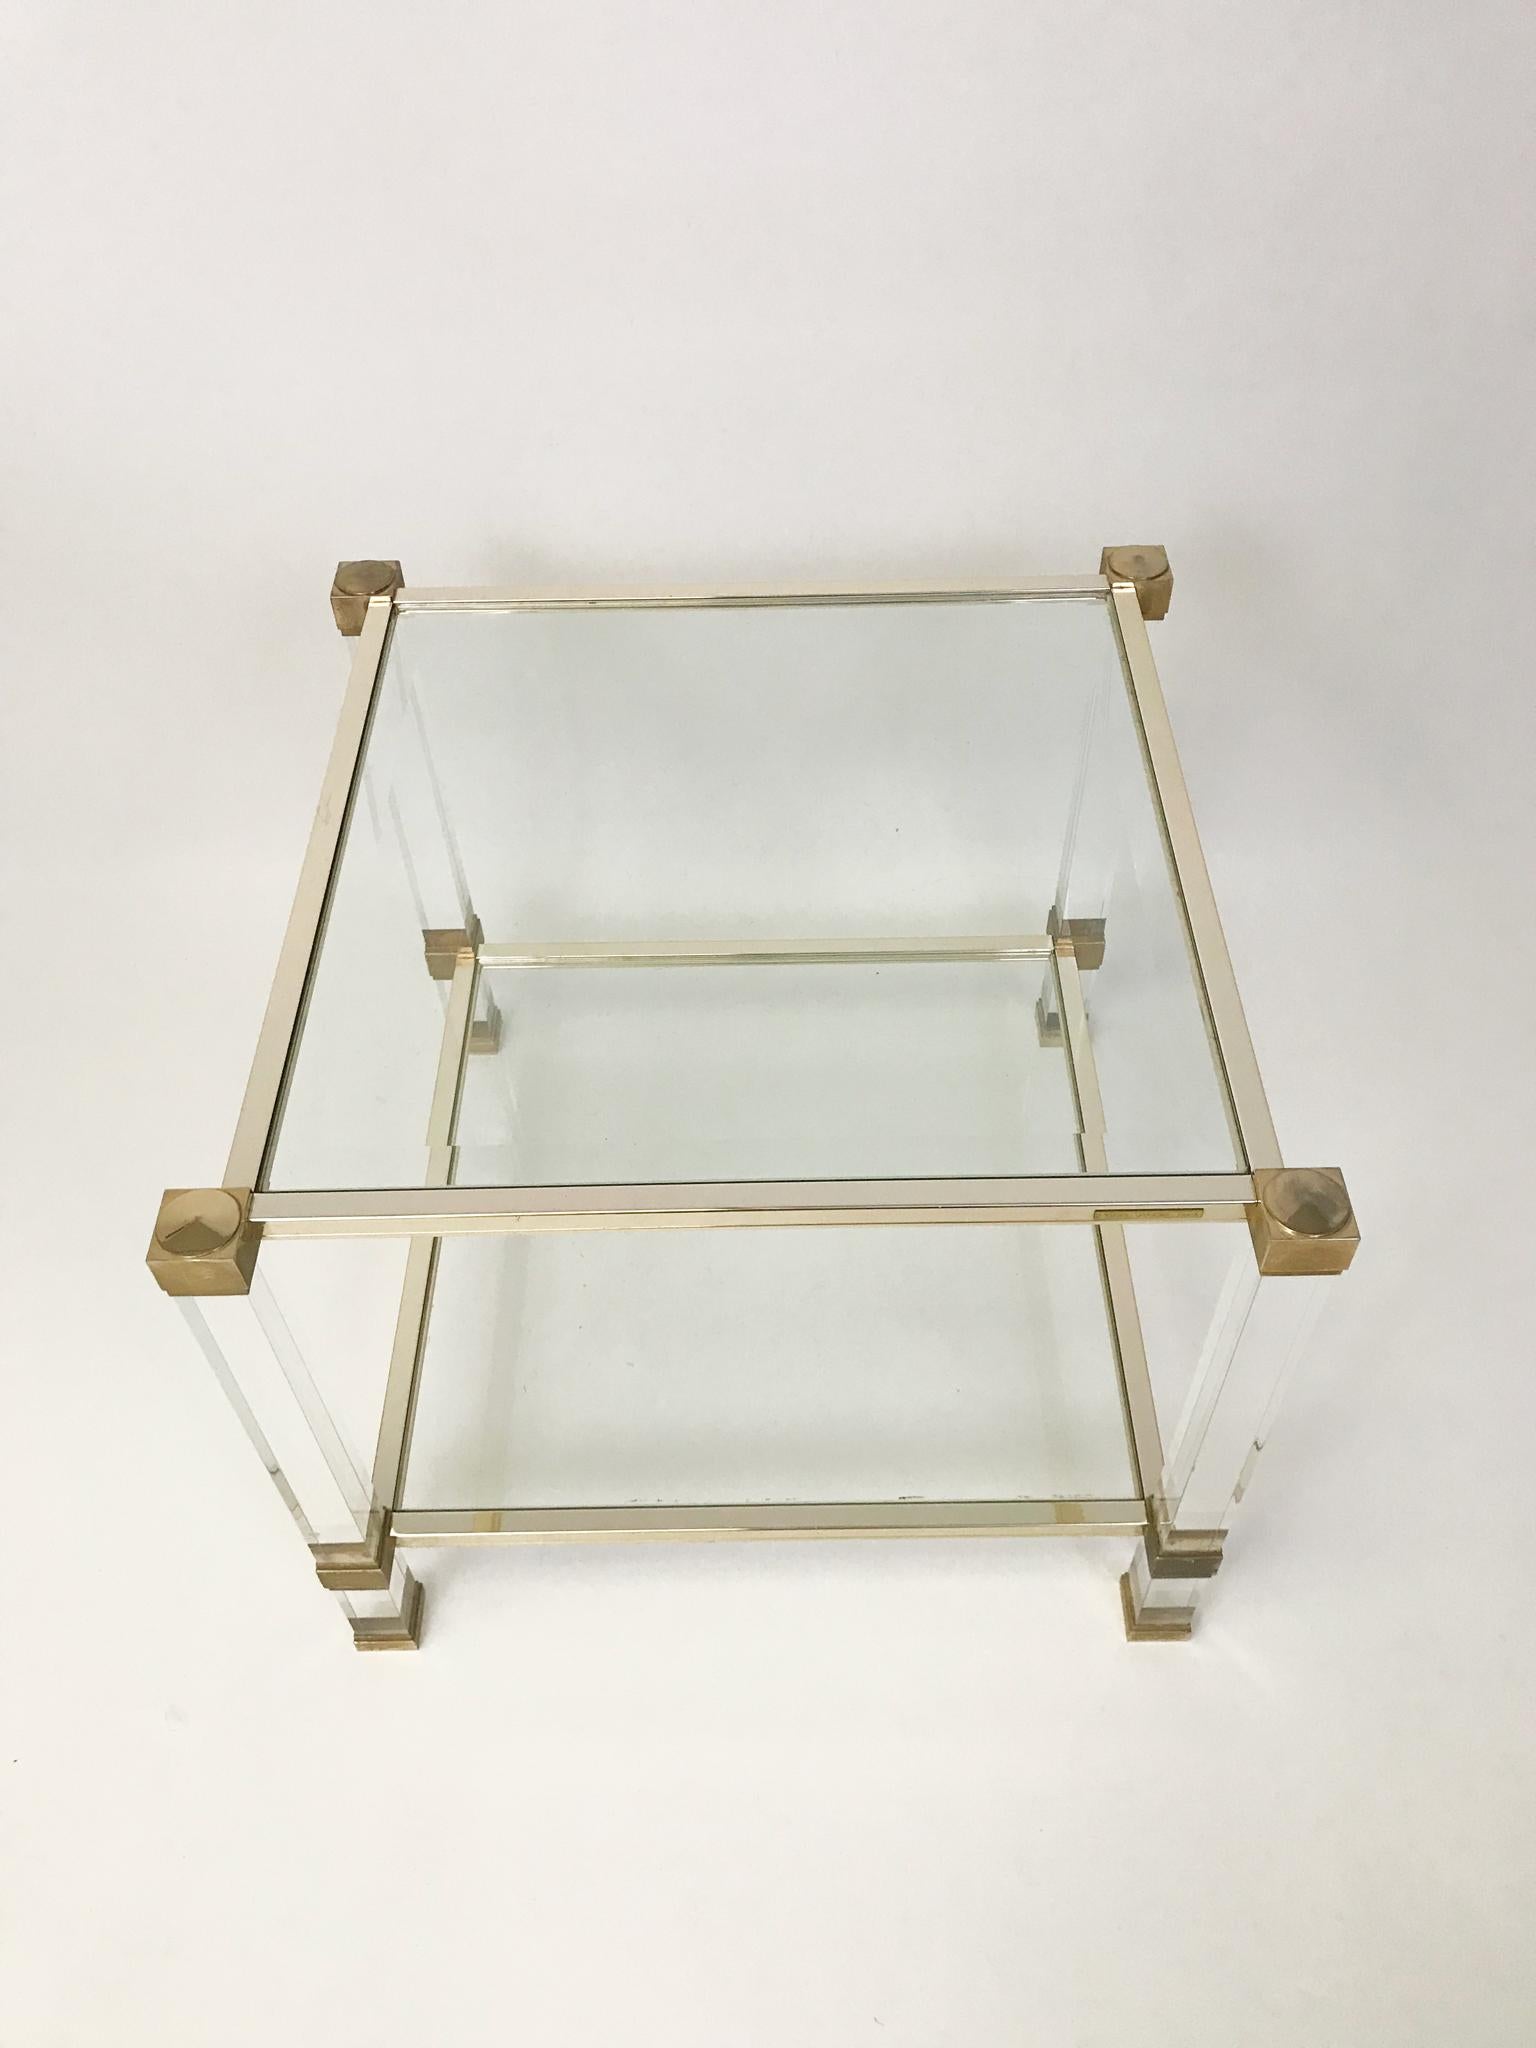 A Pierre Vandel square Lucite and brassed metal side table, with 2 tiers. Pierre Vandel label to top rail.

Height: 50cm
Width: 58cm x 58cm

Pierre Vandel was a French furniture company known for their luxury coffee tables, chairs, storage